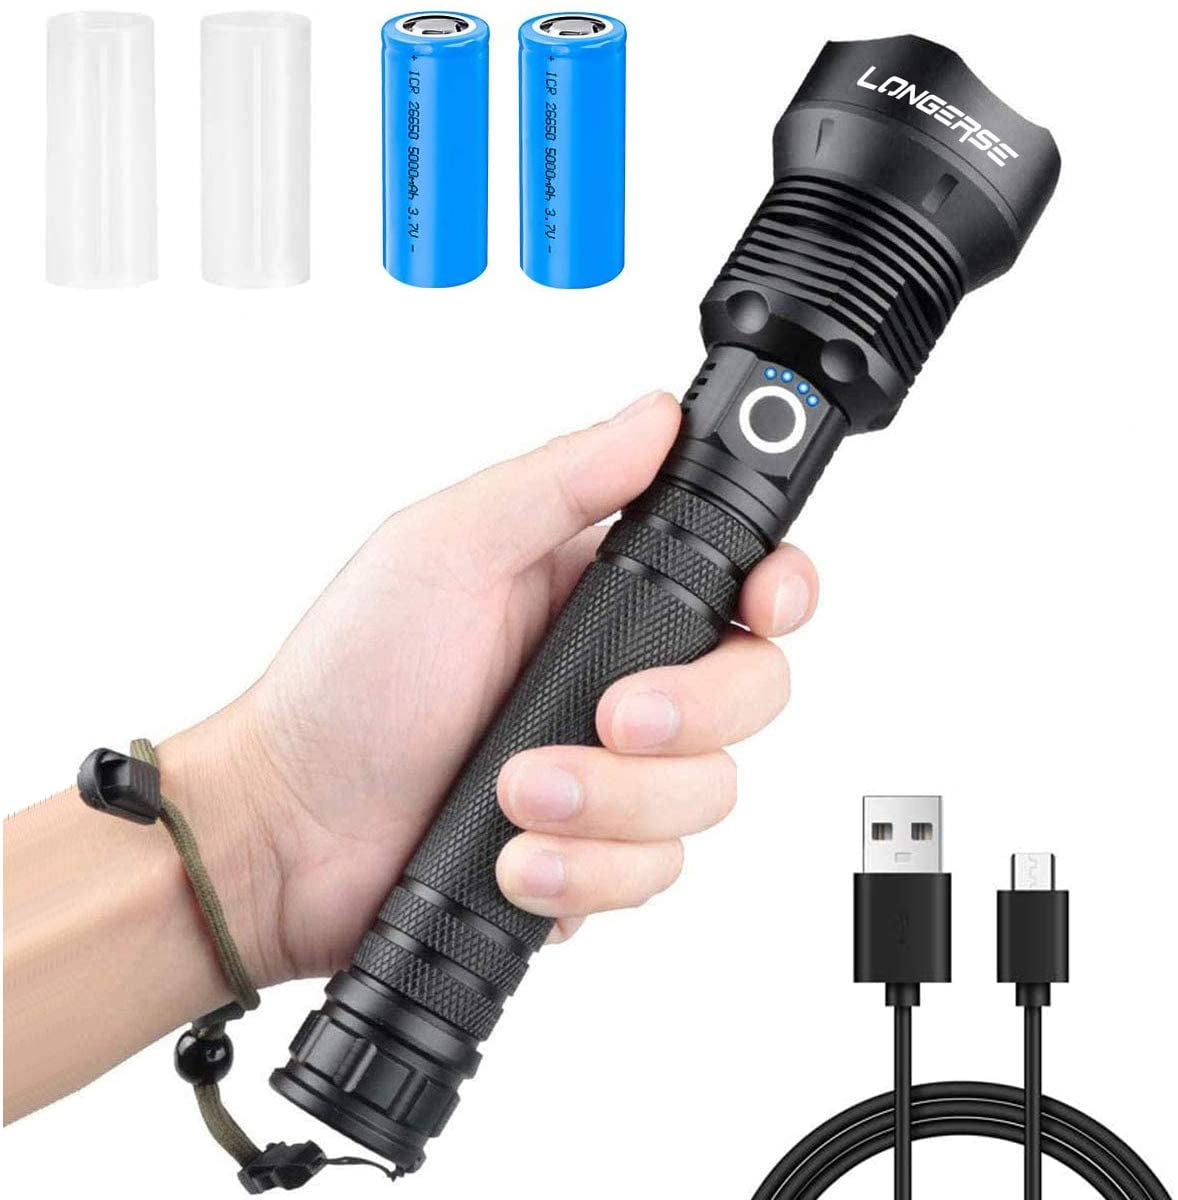 350000LM T6 LED Rechargeable High Power Torch Flashlight Lamps Light & Charger ~ 